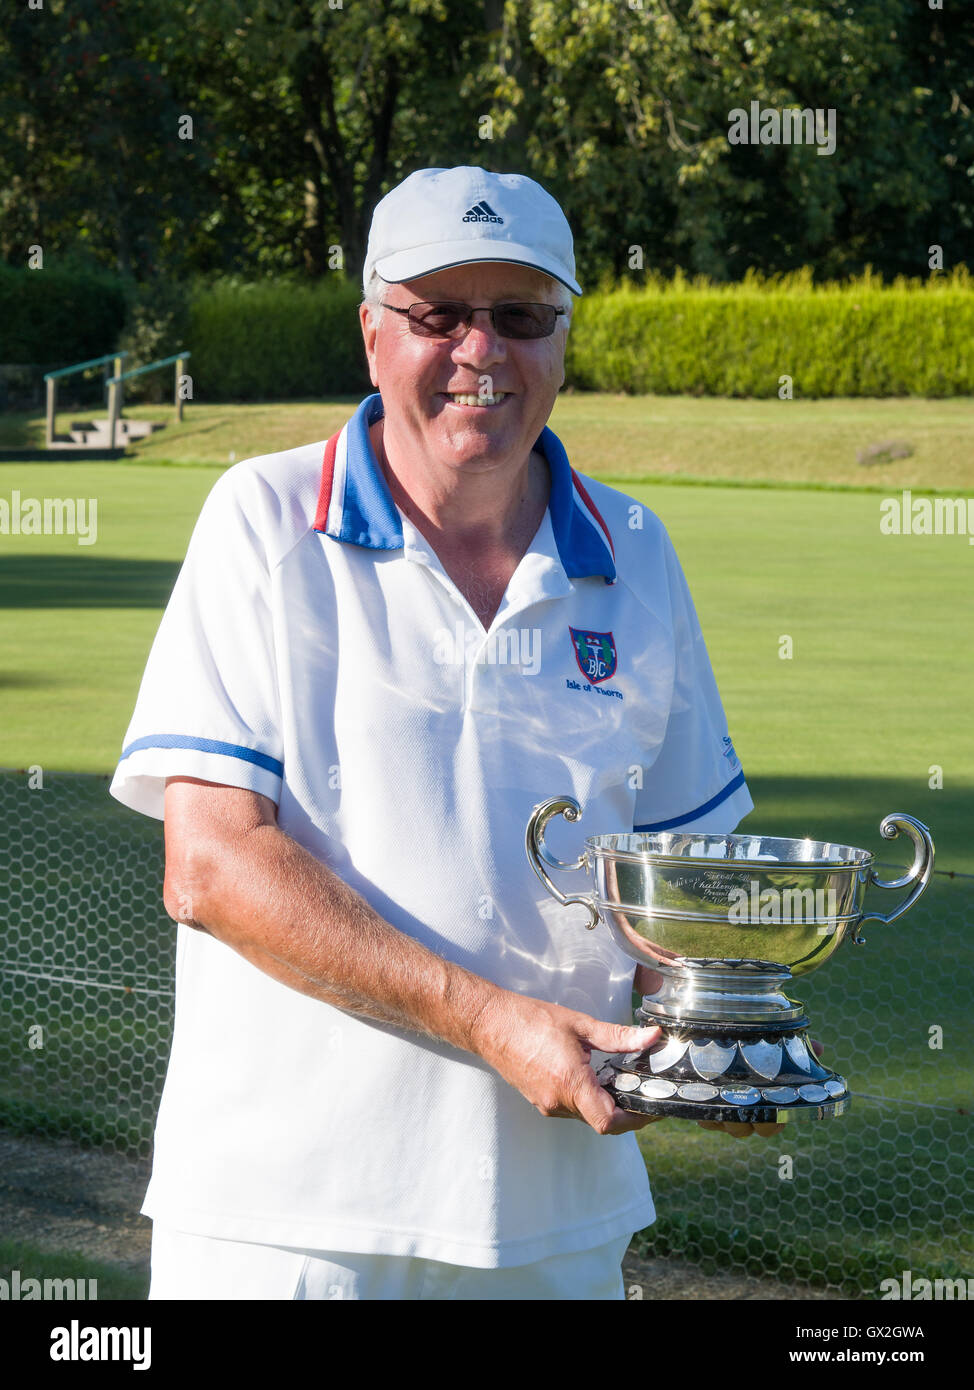 ISLE OF THORNS, SUSSEX/UK - SEPTEMBER 11 : Lawn Bowls Match at Isle of Thorns Chelwood Gate in Sussex on September 11, 2016. Unidentified man Stock Photo